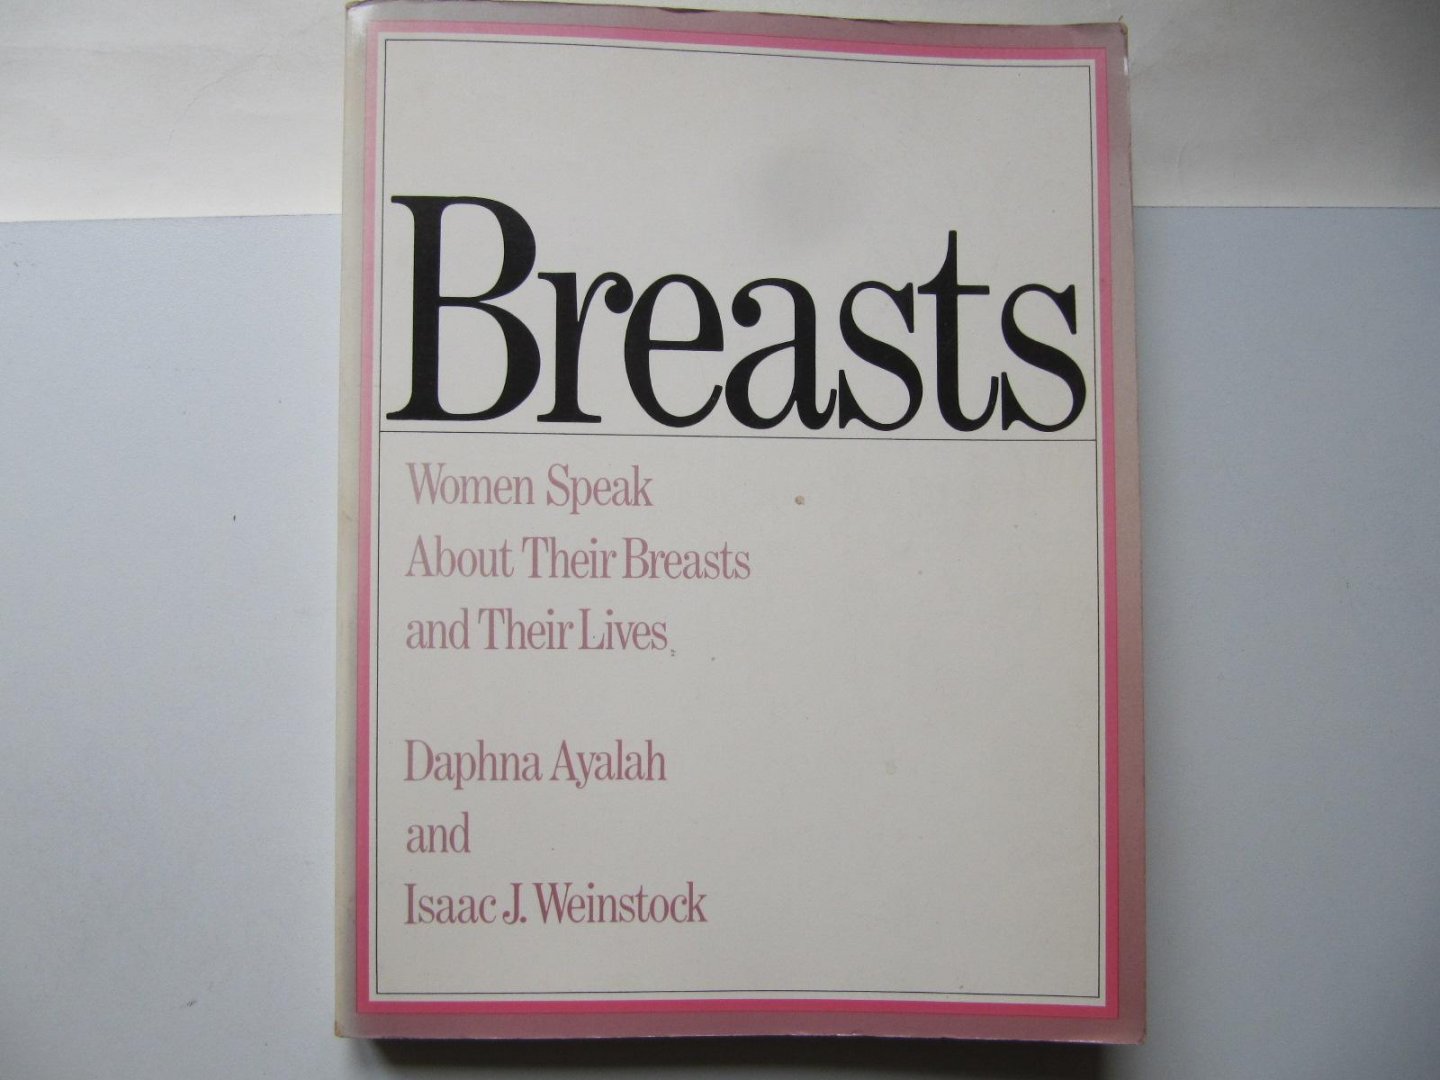 Daphna Ayalah and Isaac J. Weinstock - Breasts / Women speak about hteir breasts and their lives.